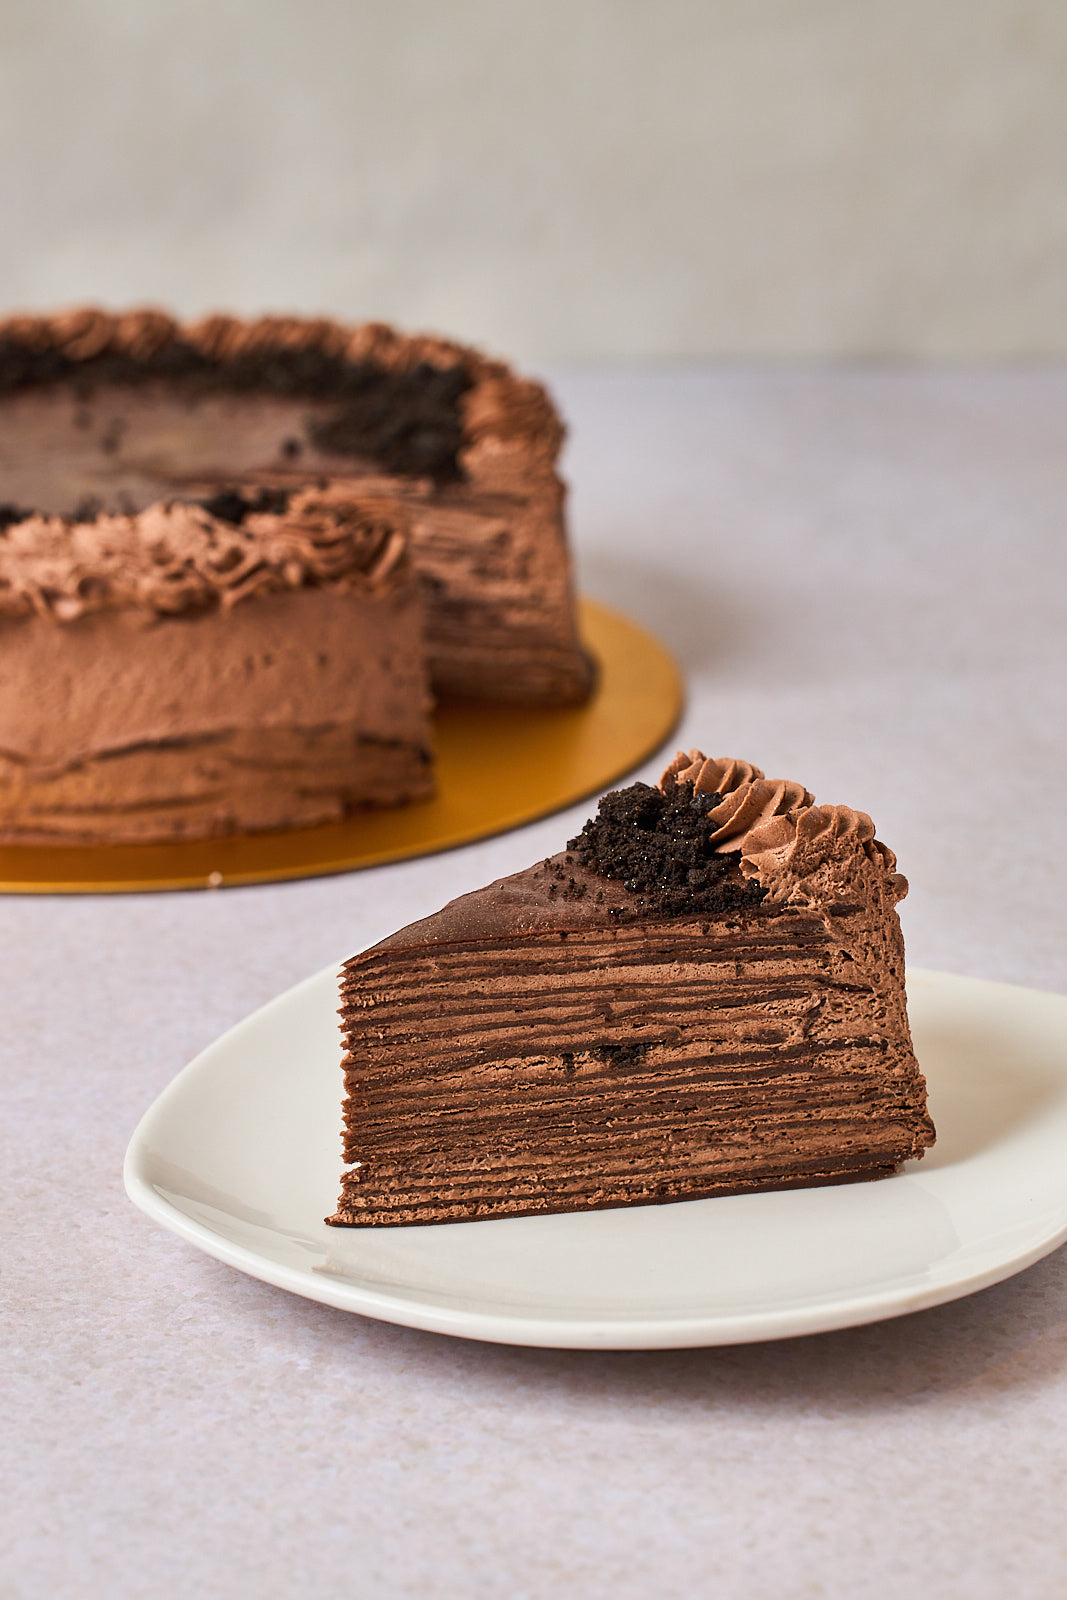 single slice cut out from a round chocolate crepe cake, revealing multiple delicate layers, displayed on a white plate